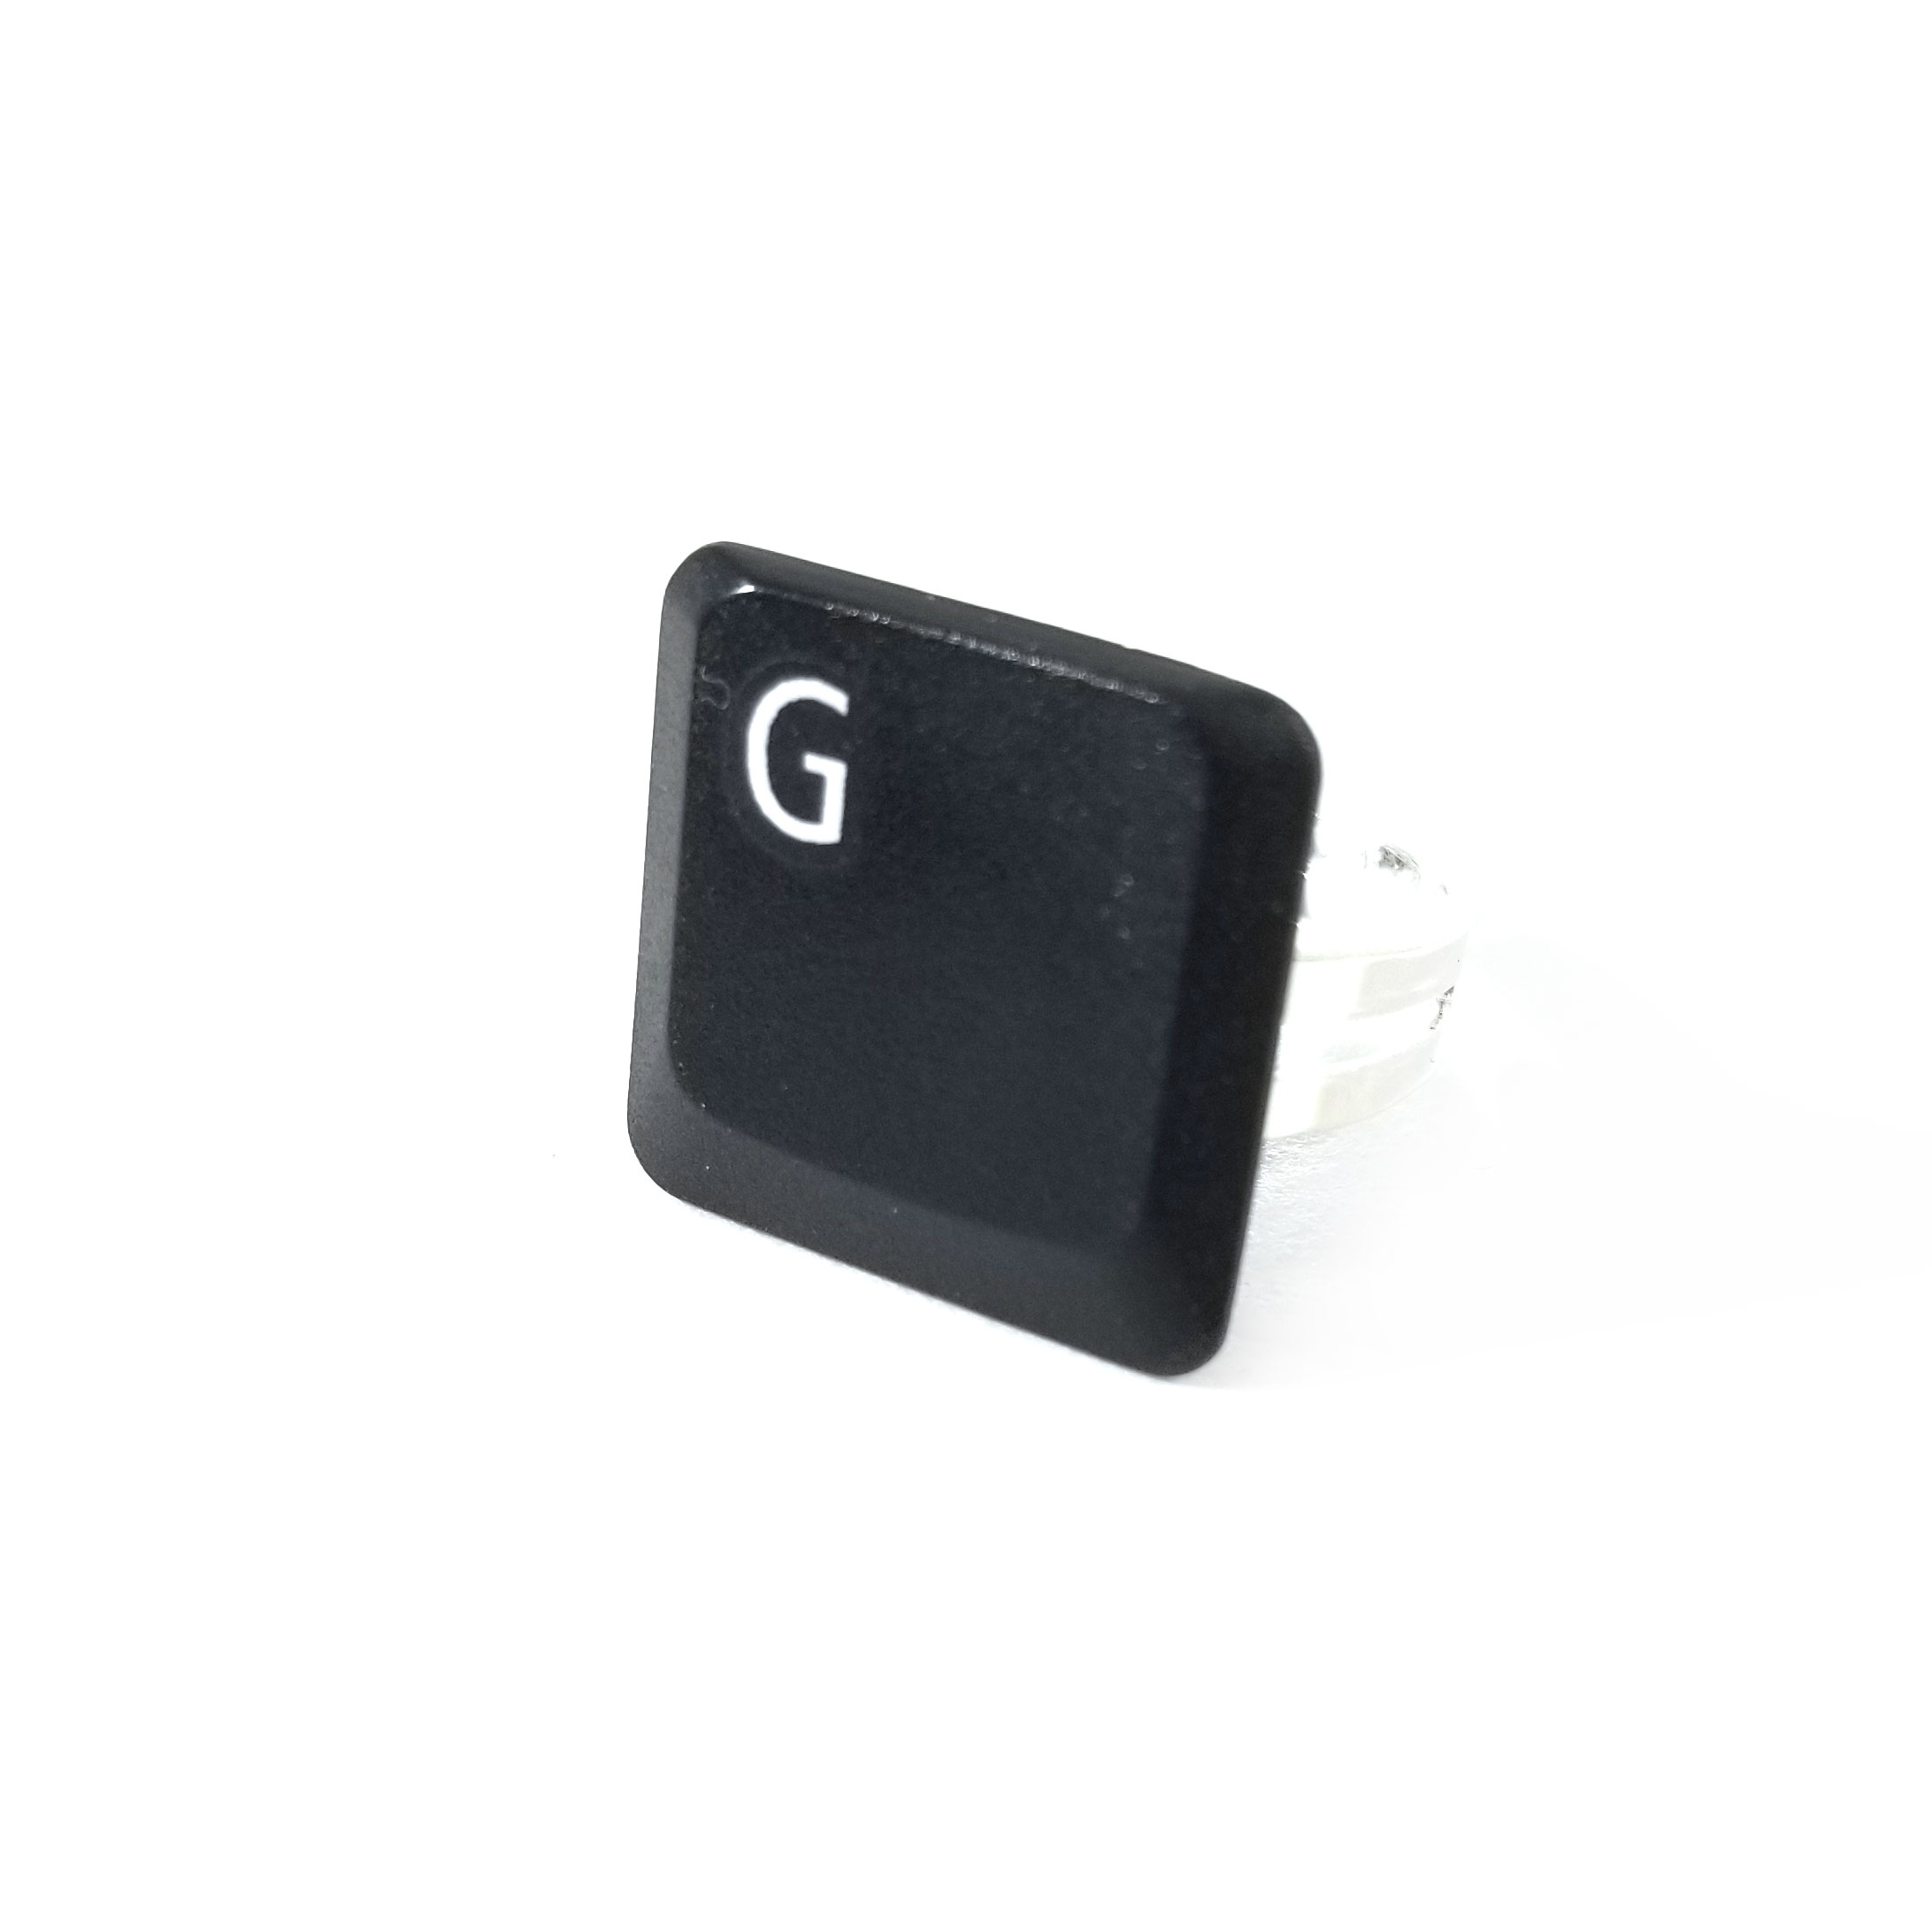 Letter G Adjustable Upcycled Keyboard Ring by Wilde Designs